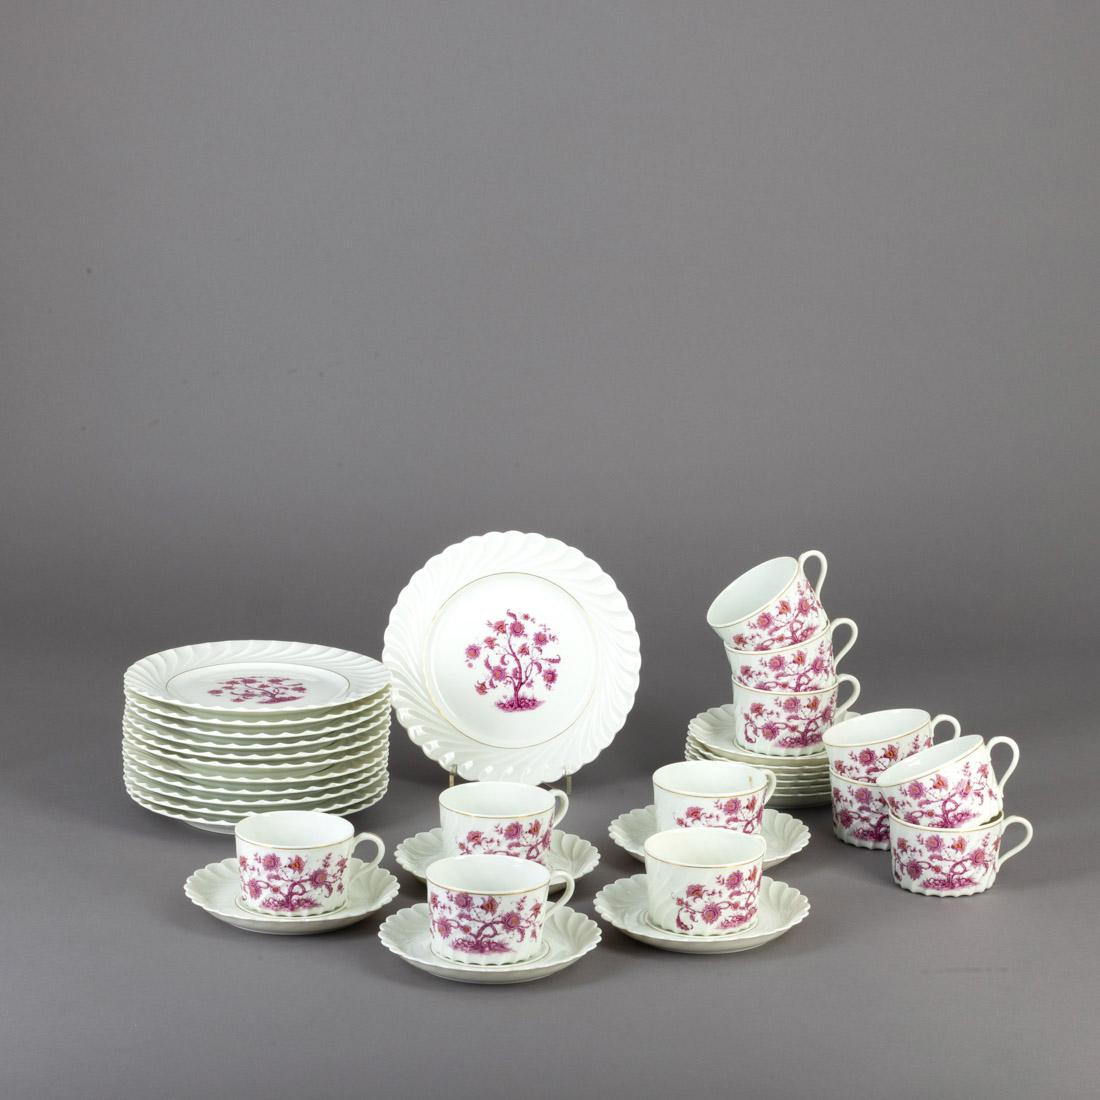 Tea set (12 cups with saucer and 12 cake dishes) in Limoges porcelain, gummed decoration, polychrome and golden 